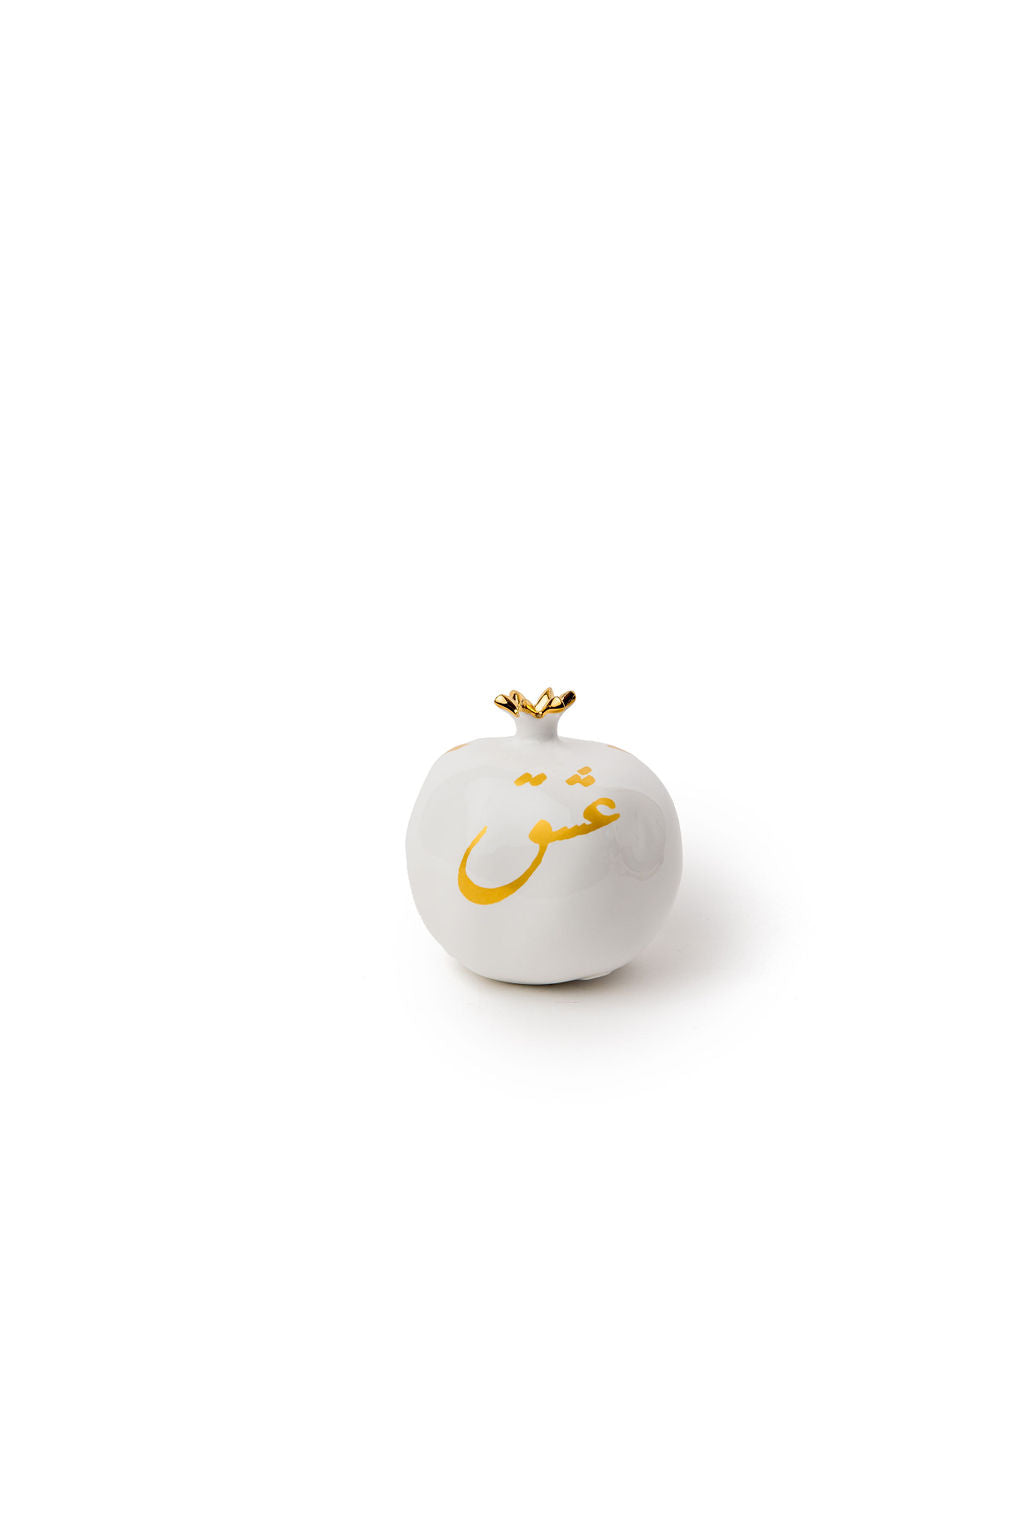 Love - Pomegranate With Gold.